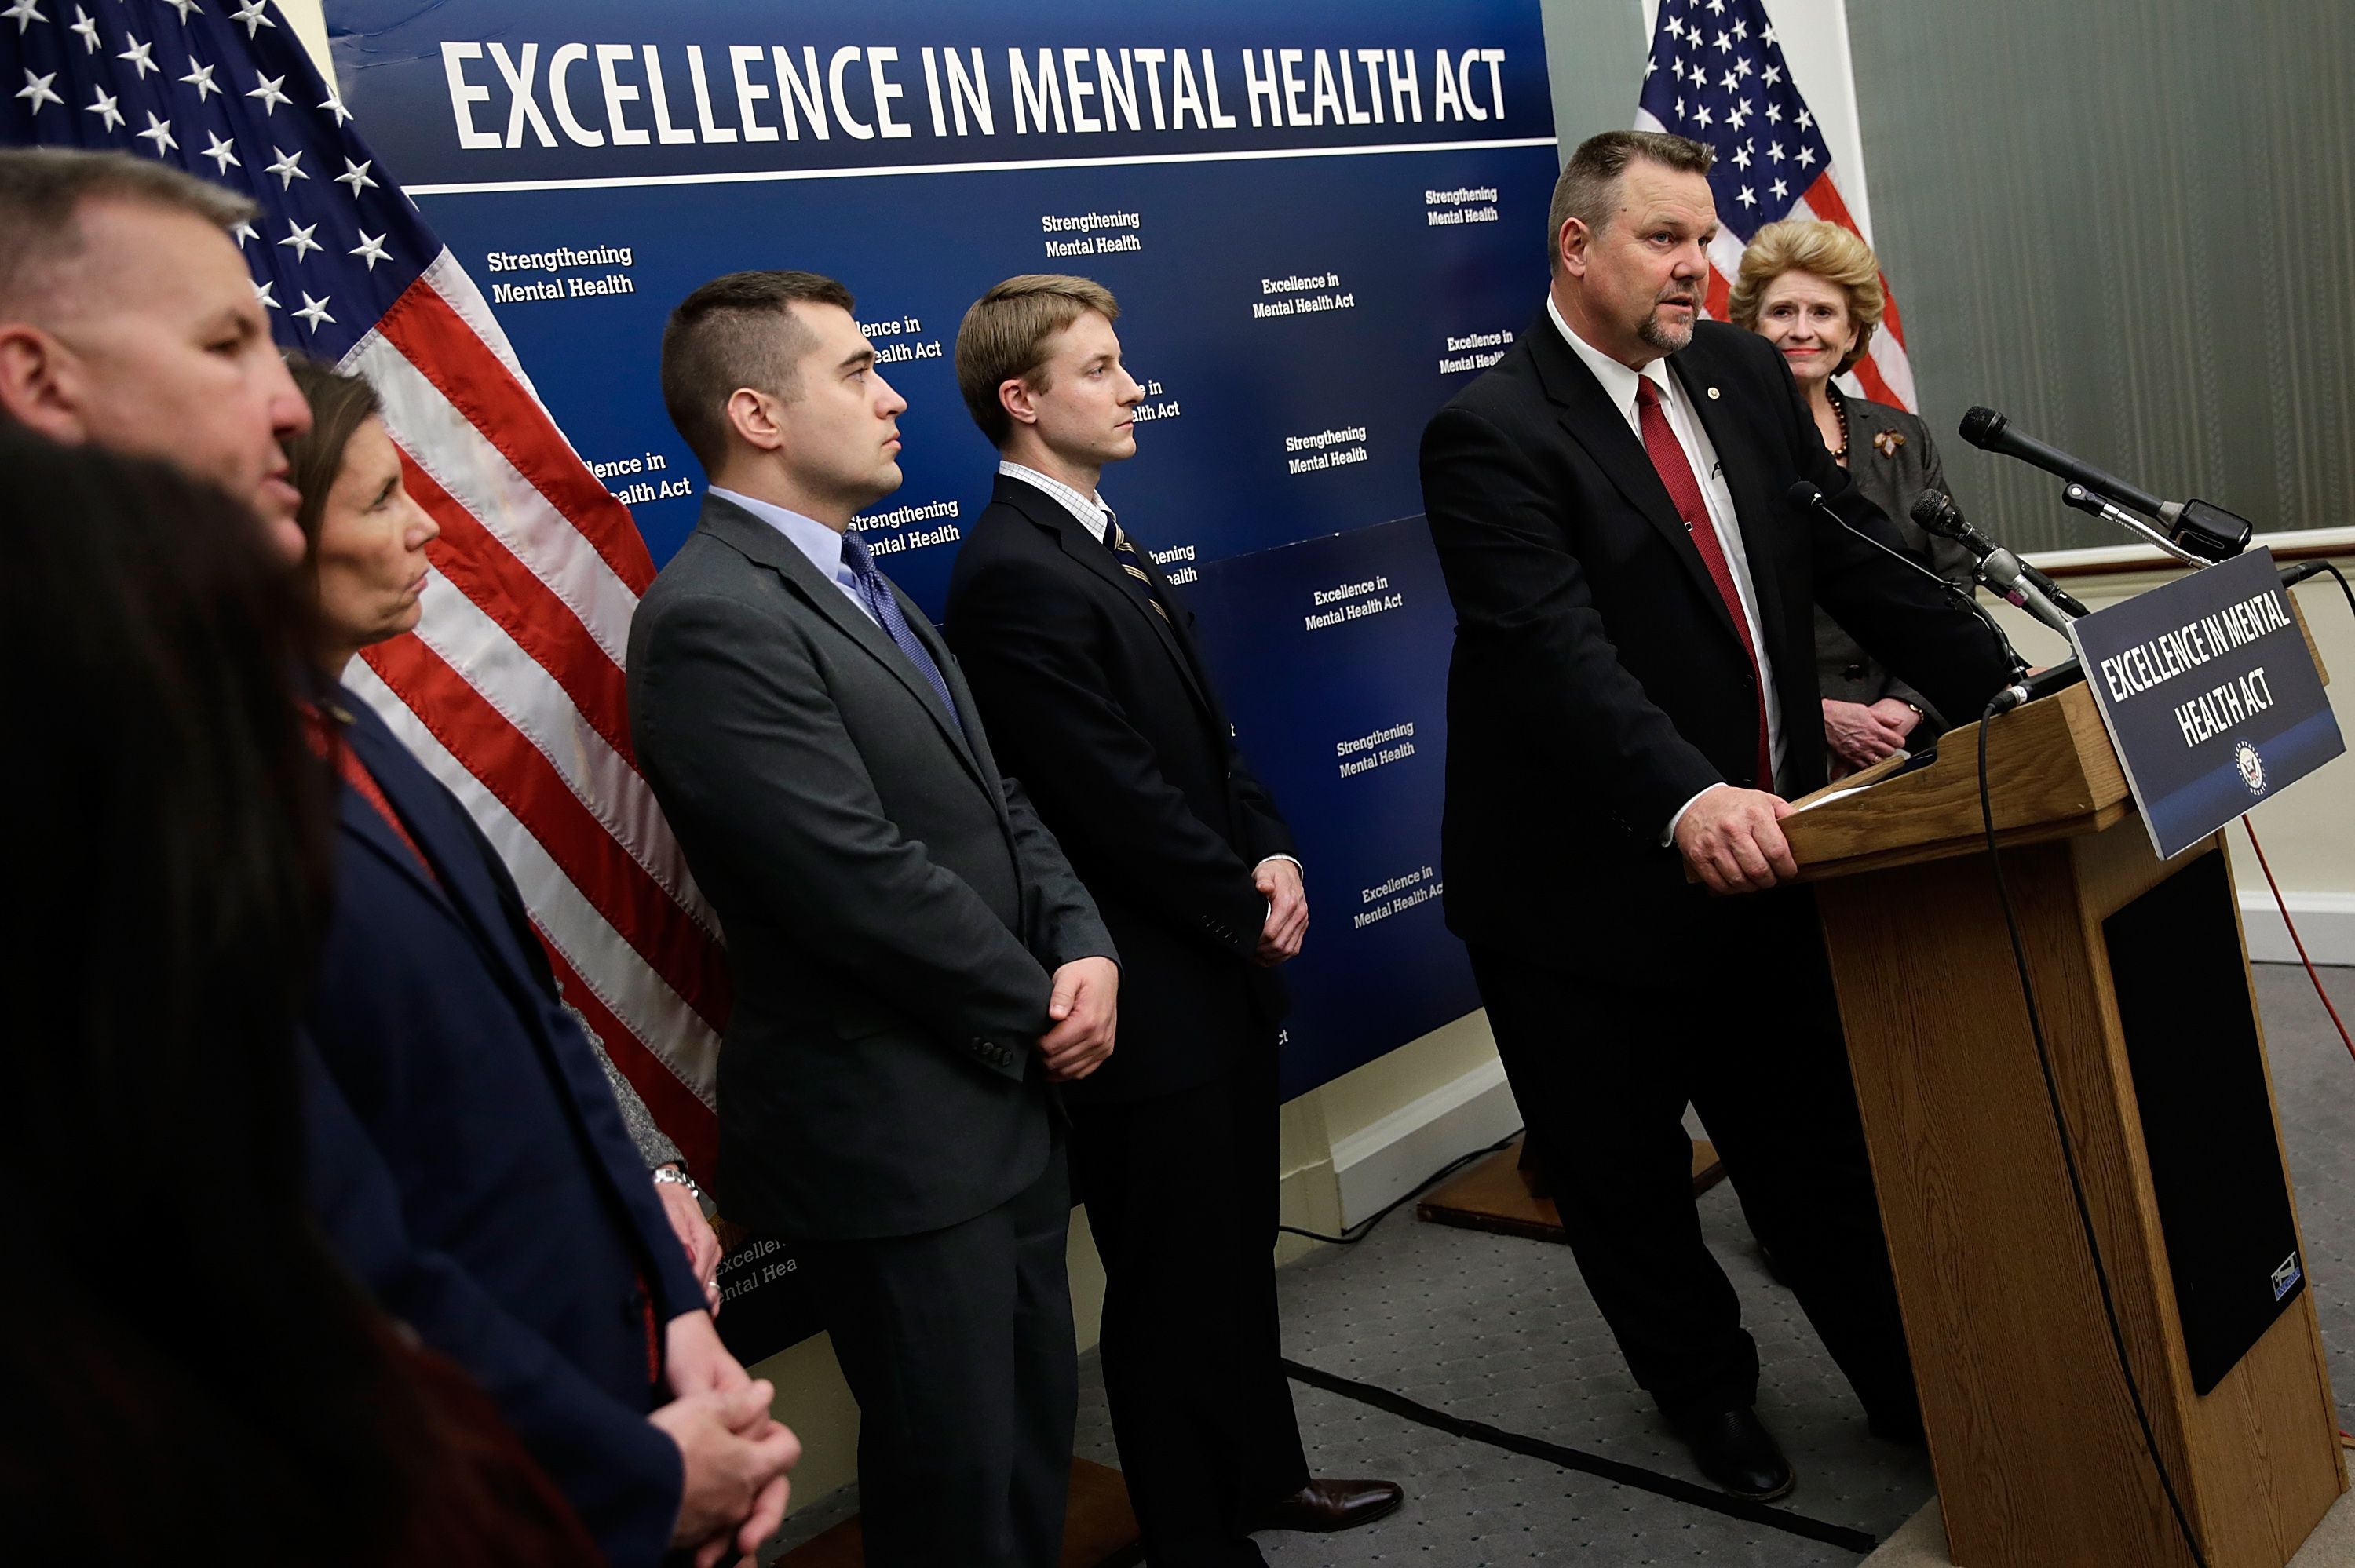 U.S. Sen. Jon Tester (D-MT) (2nd R) speaks during a press conference calling for passage of mental health legislation as part of a gun safety package with U.S. Sen. Debbie Stabenow (D-MI) (R) at the U.S. Capitol